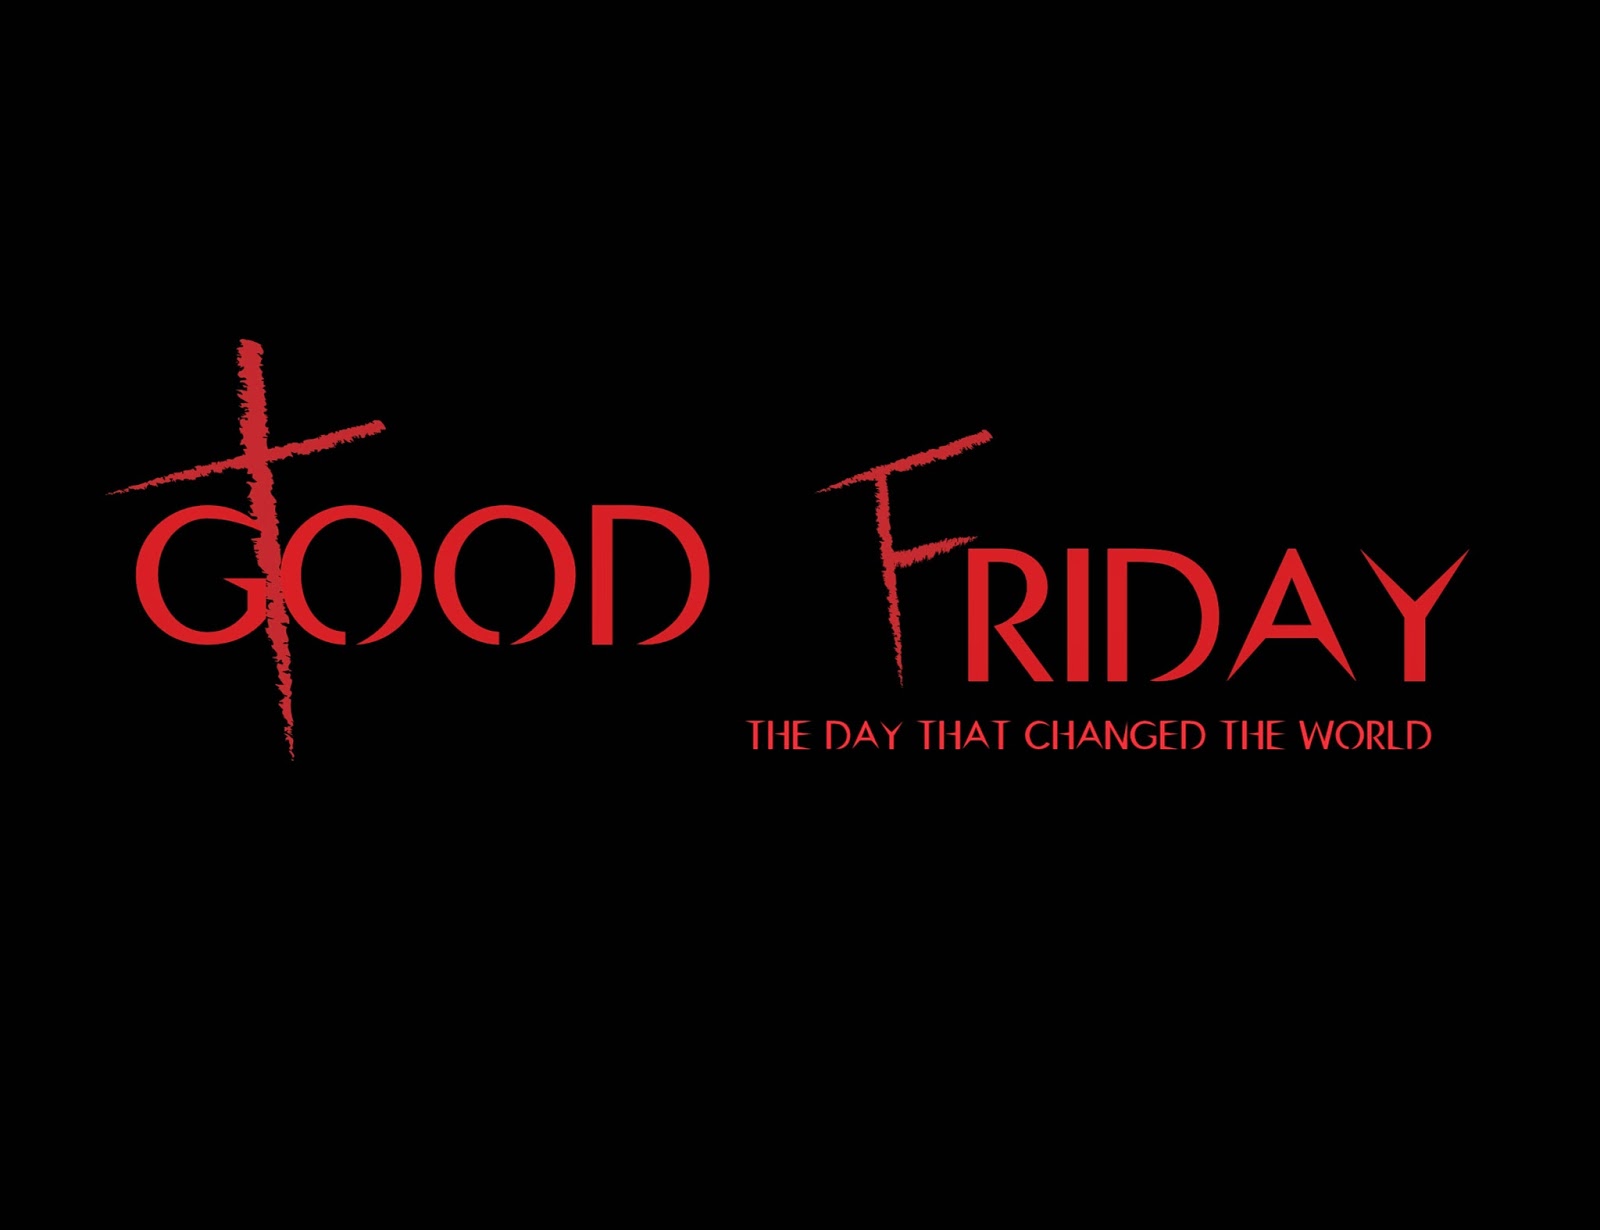 Good Friday Backgrounds 2018 - Good Friday Images Hd Free Download , HD Wallpaper & Backgrounds